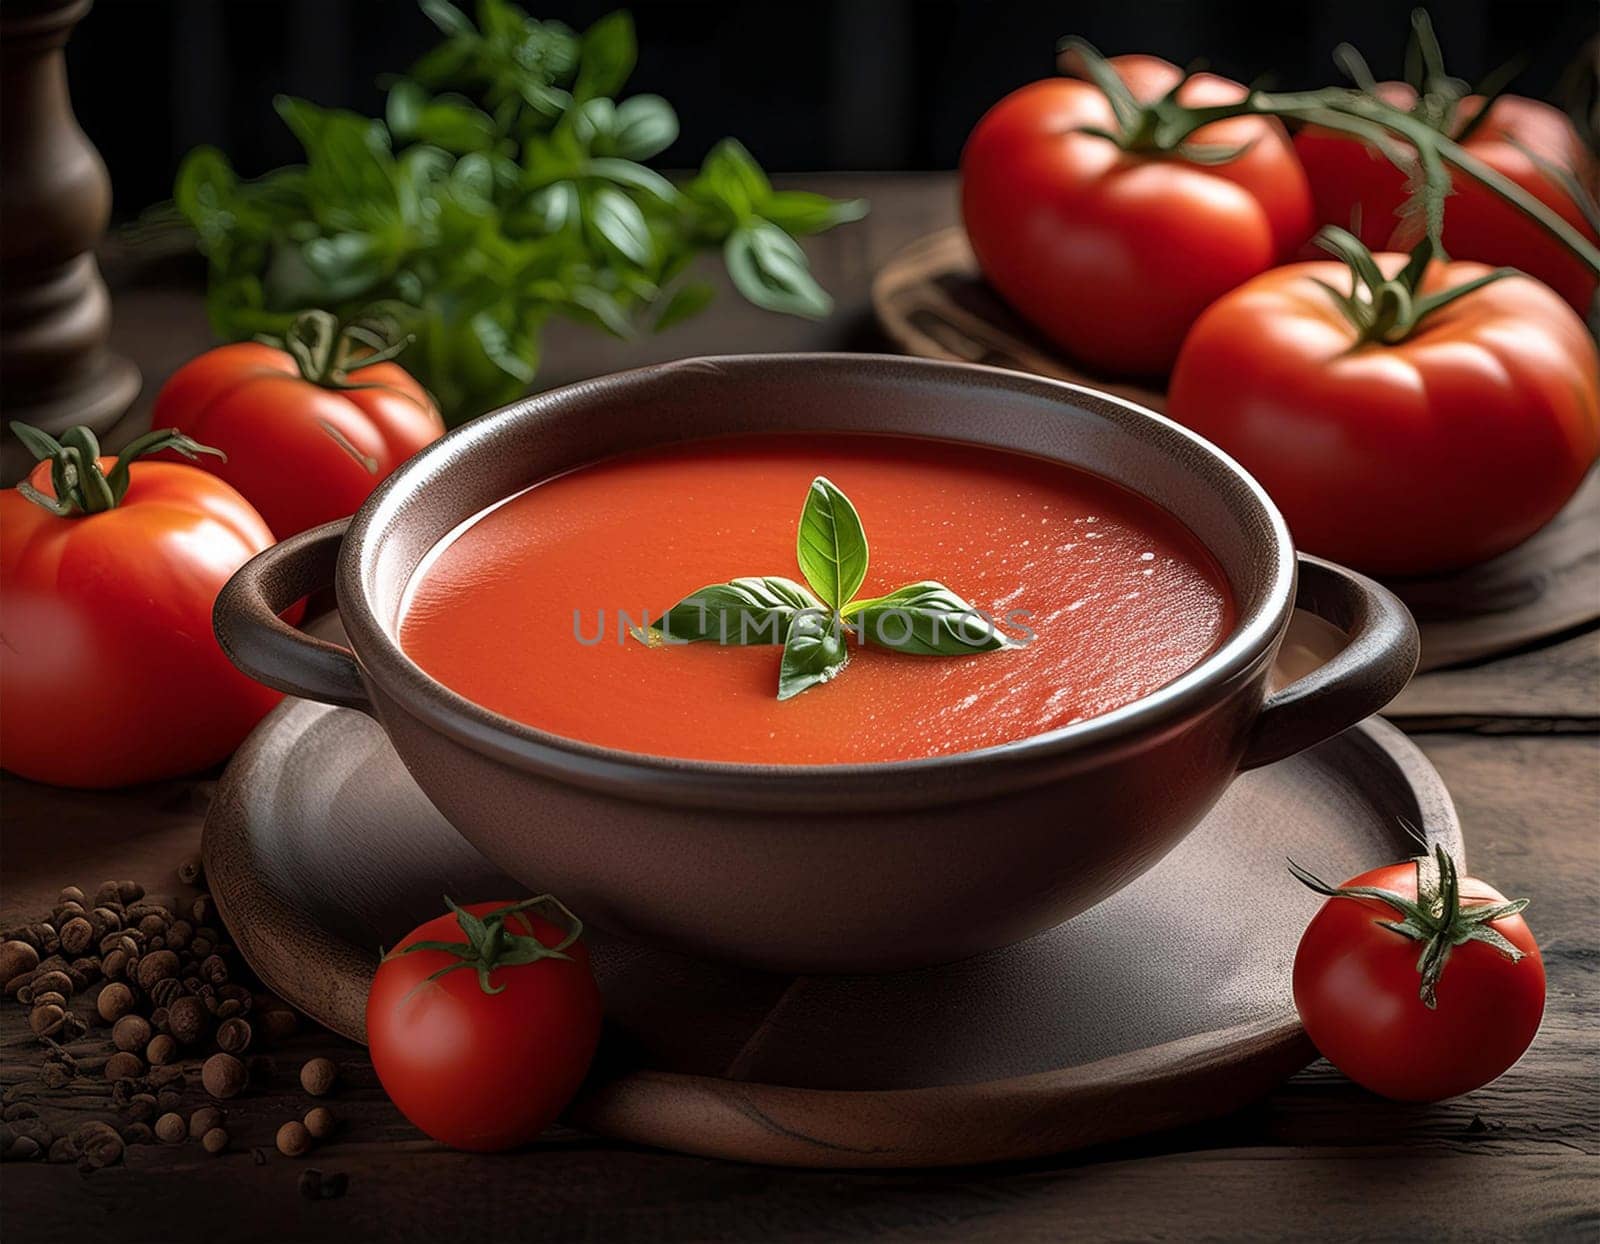 Tomato soup with basil in a bowl. Dark background. Close-up. View from above.